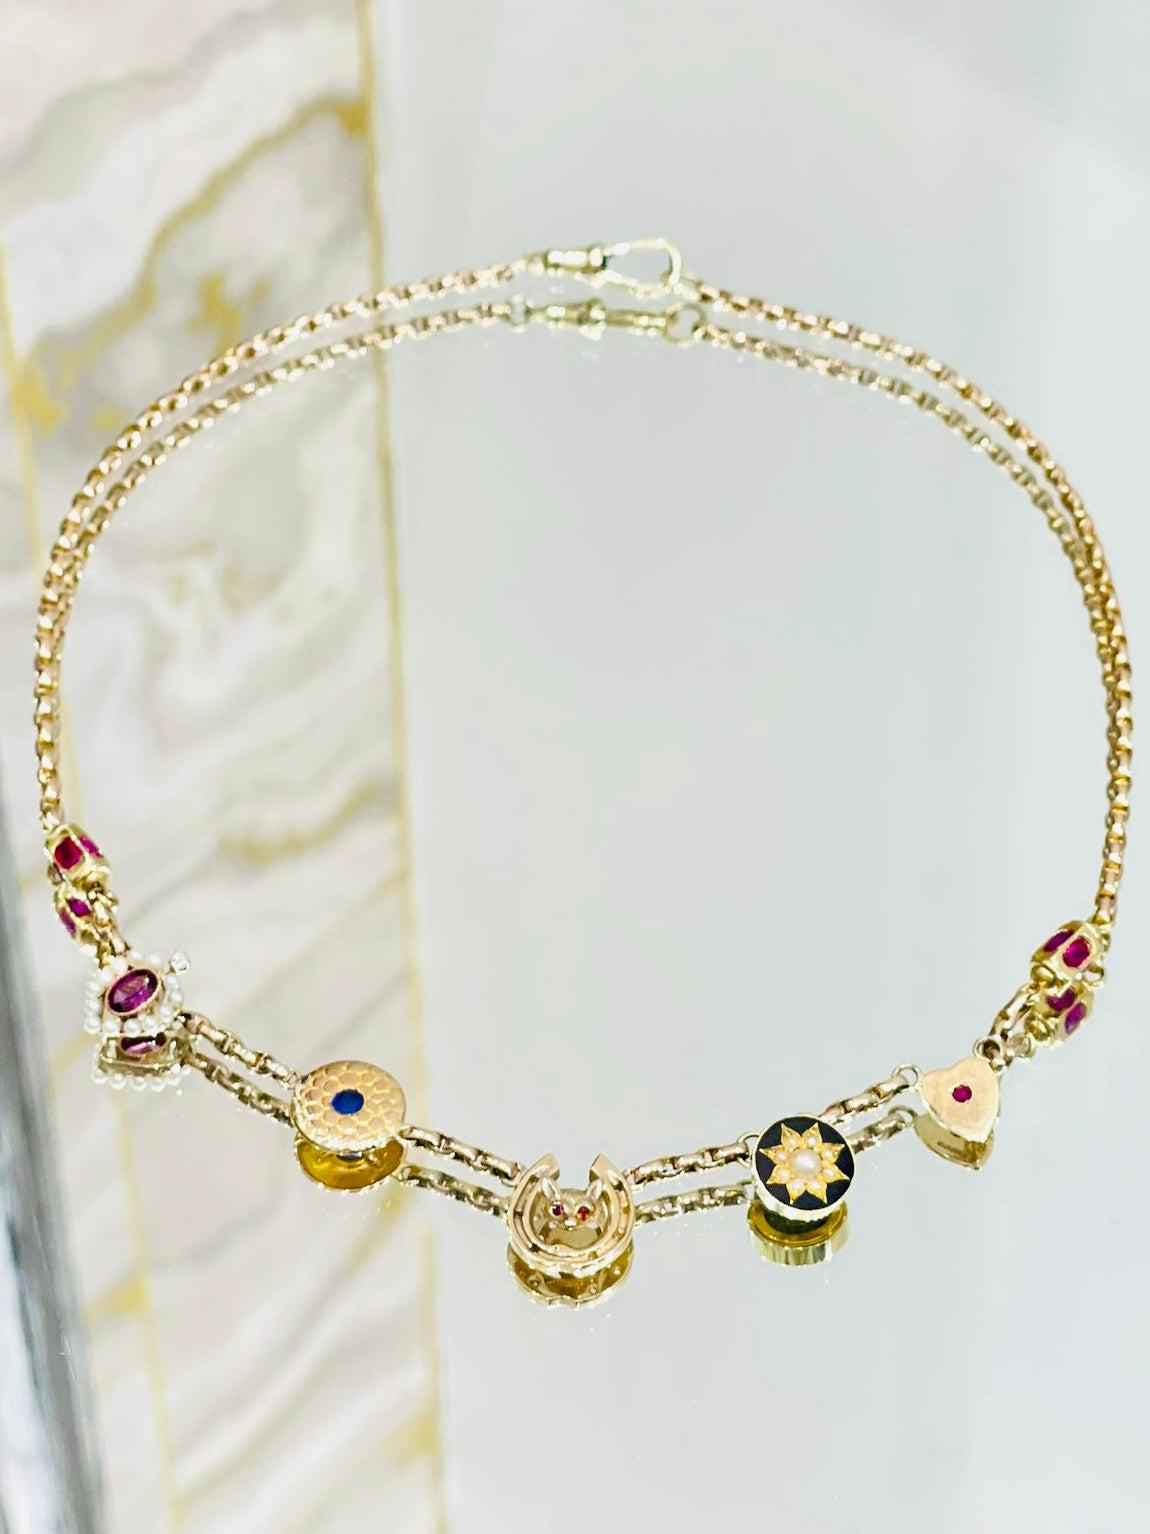 Women's Victorian Charm Necklace 15ct Gold With Rubies, Sapphires & Pearls For Sale